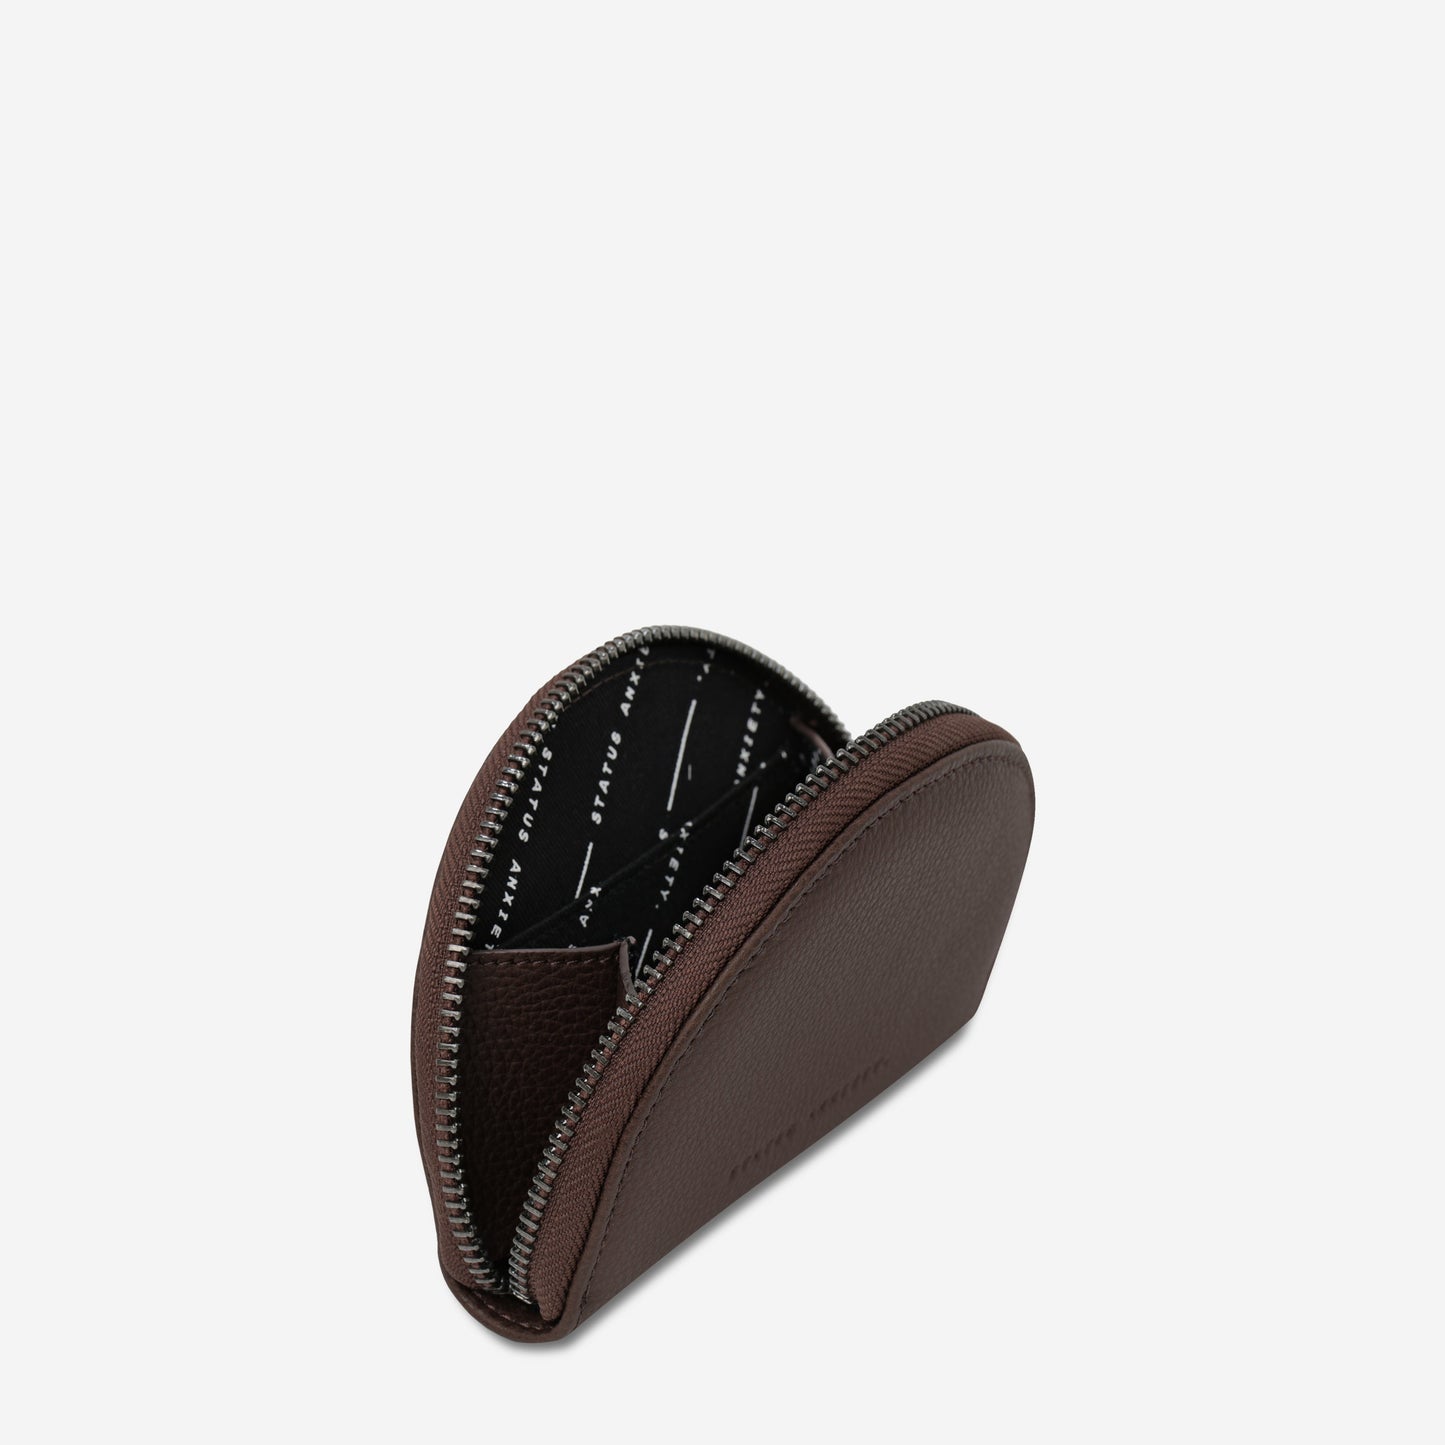 Lucid Leather Wallet - Cocoa